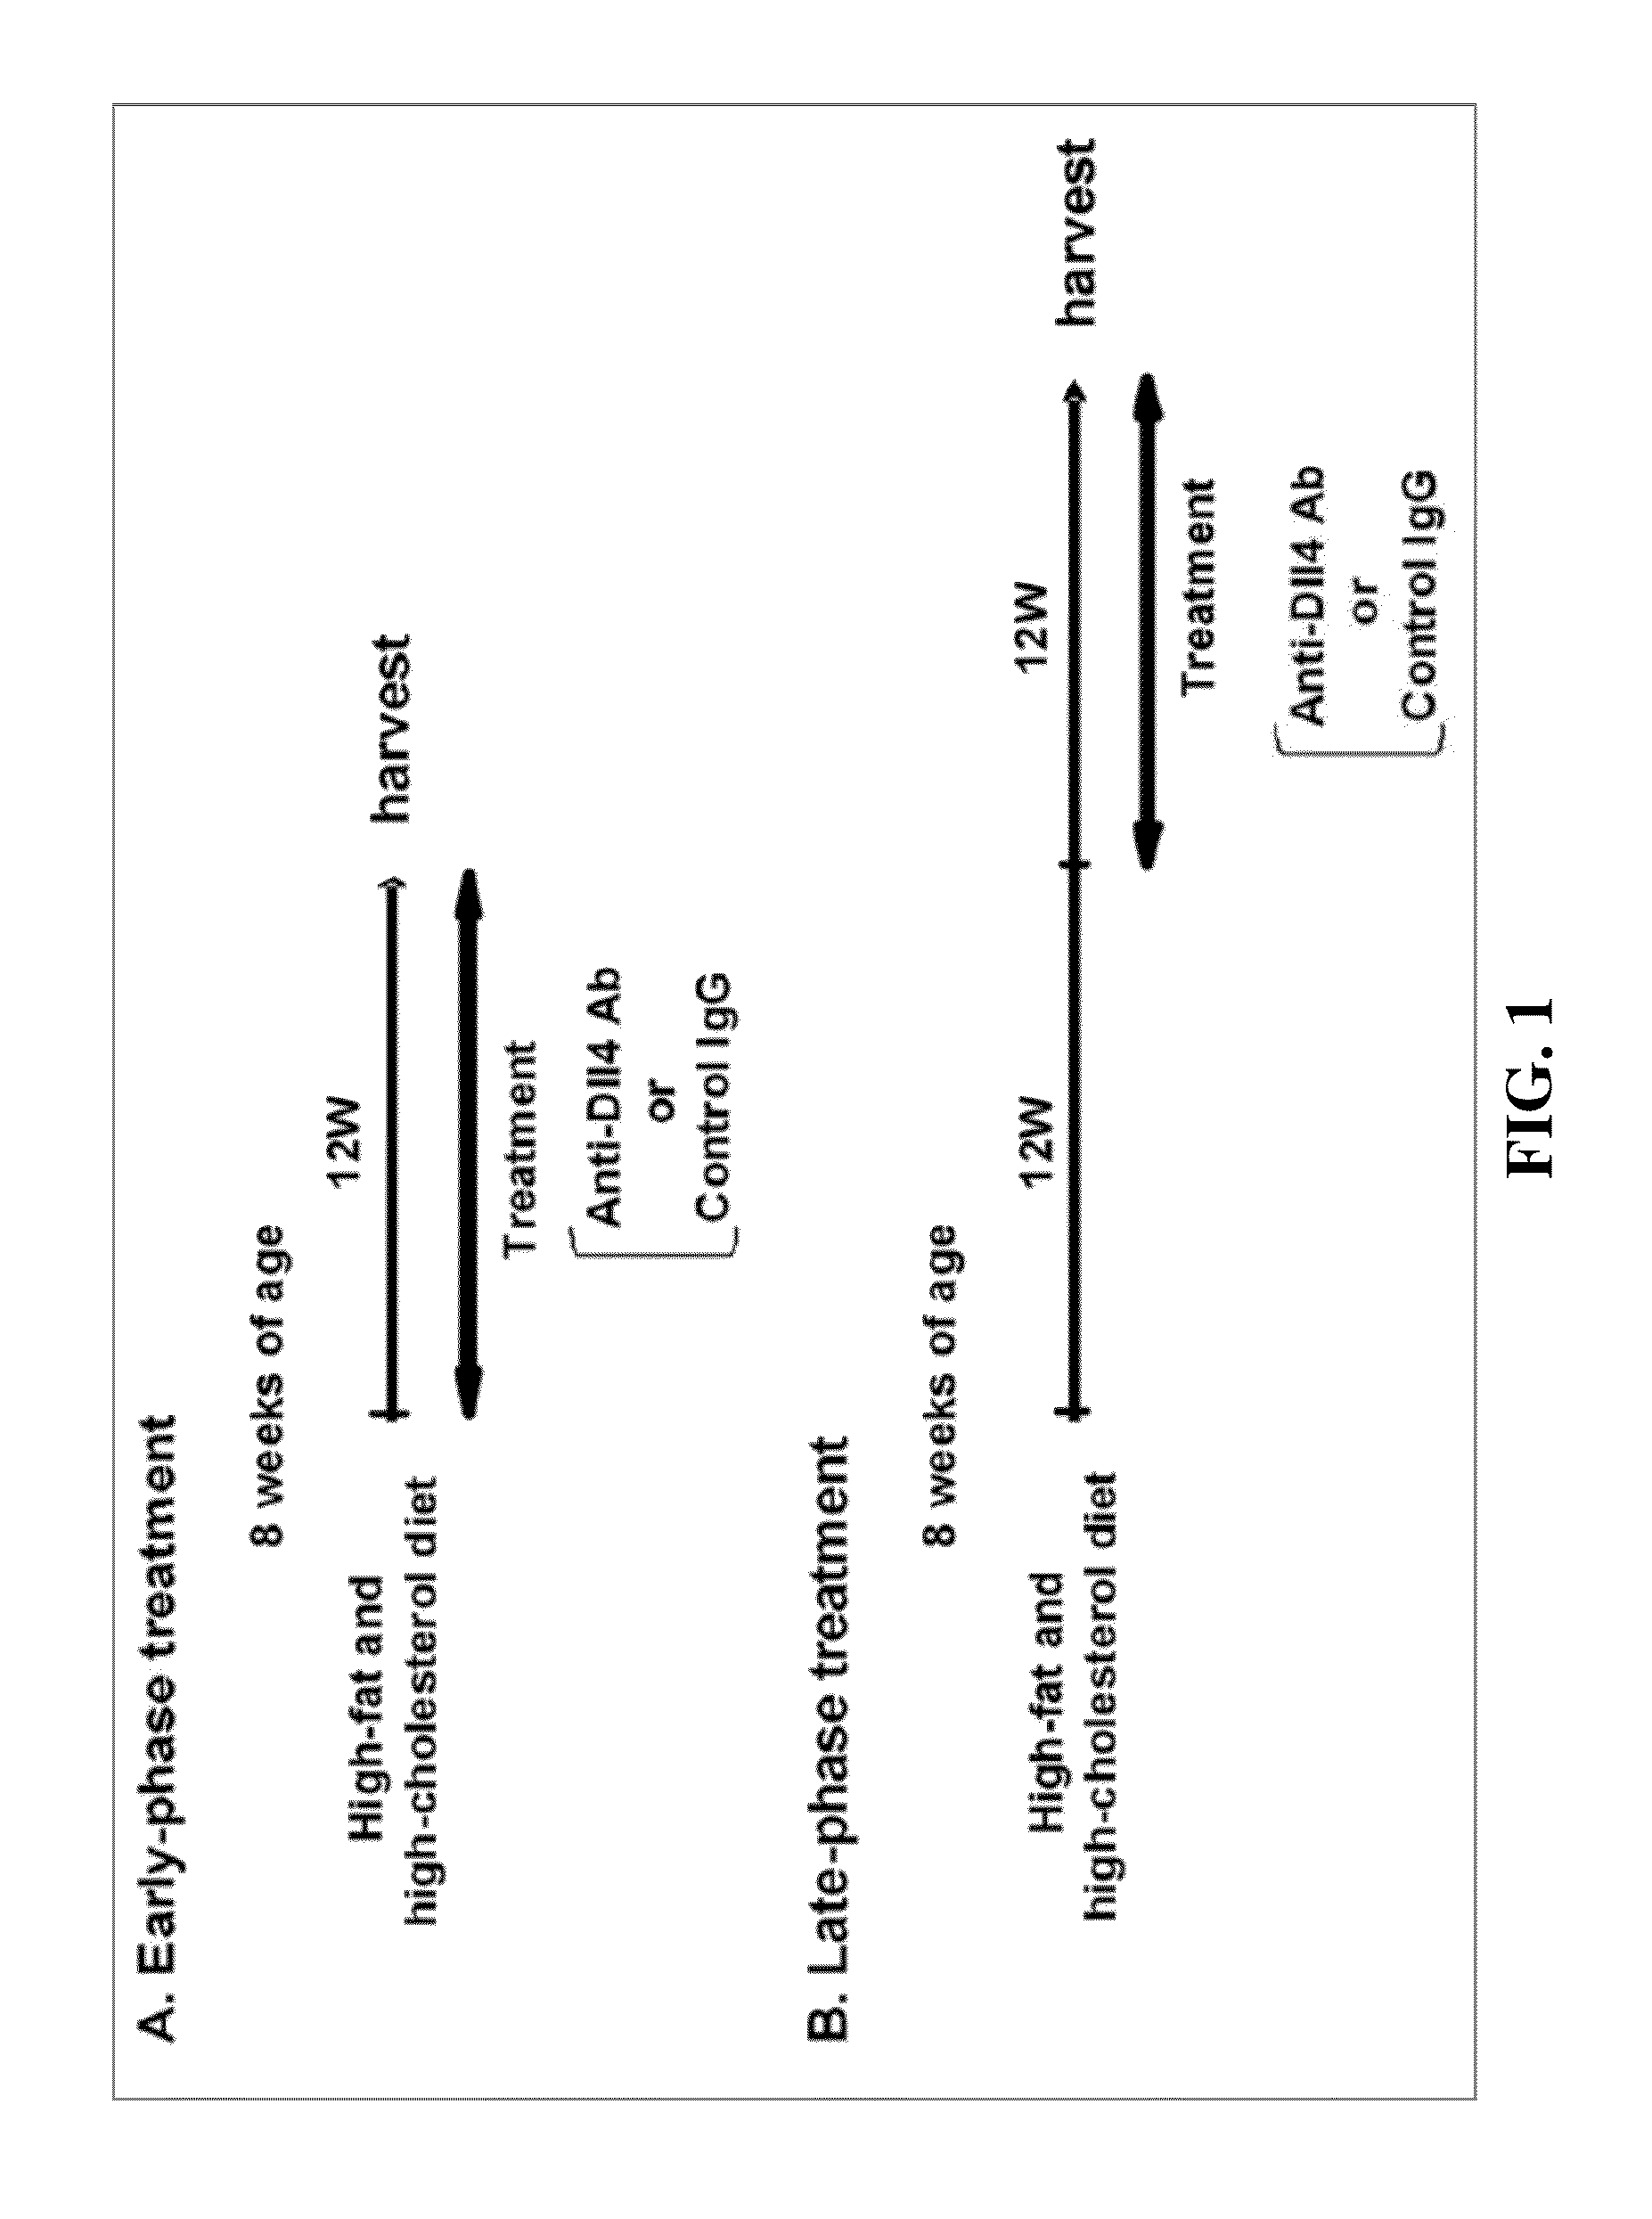 Notch inhibition in the treatment and prevention of a metabolic disease or disorder and cardiovascular complications thereof